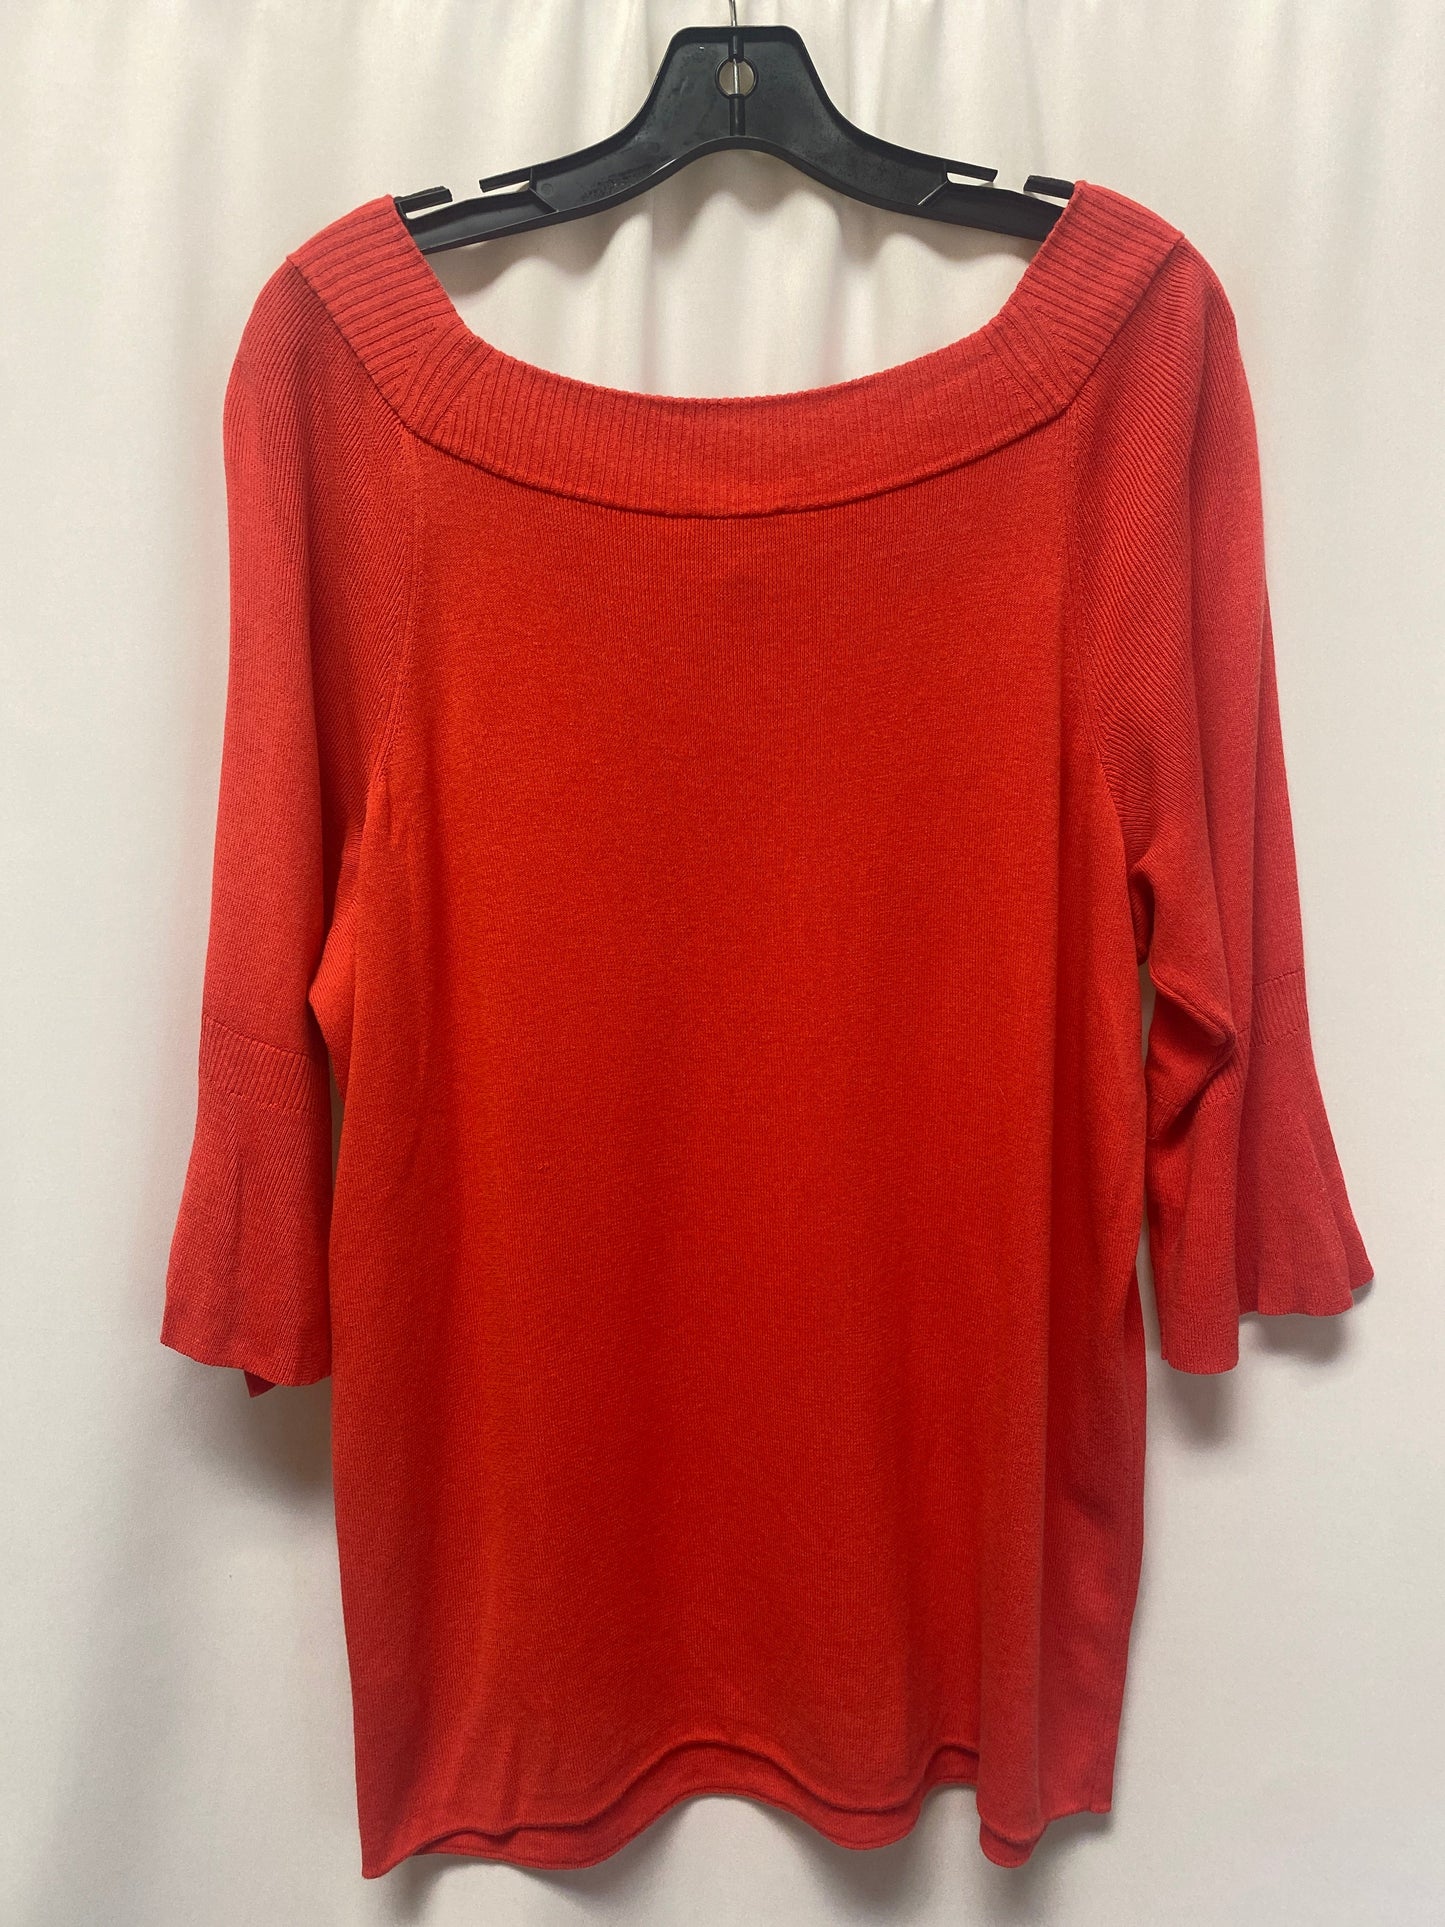 Red Top 3/4 Sleeve Talbots, Size 1x